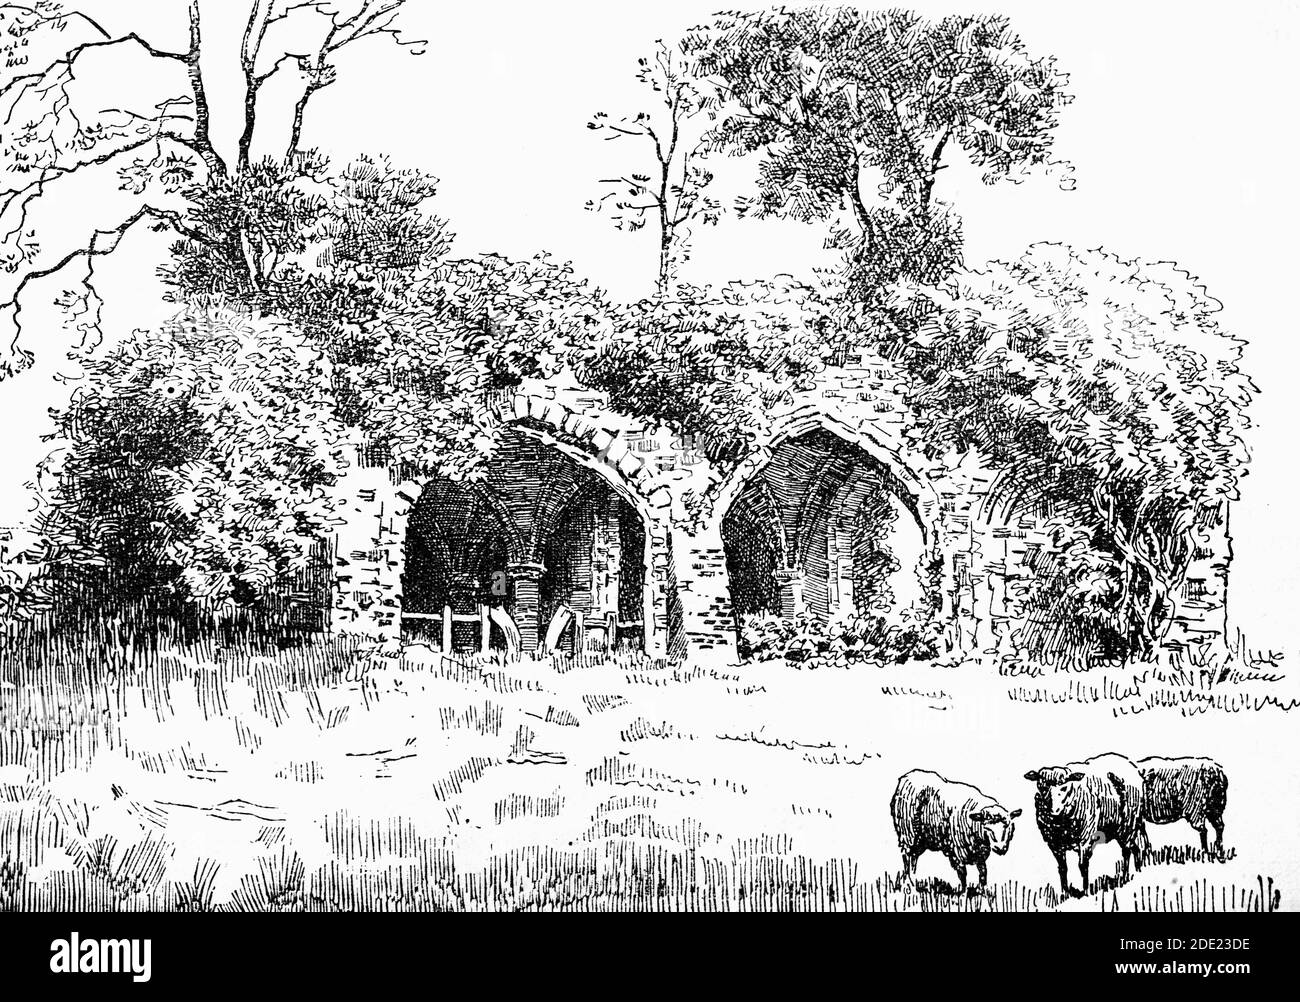 A 19th Century view of the ruined crypt of Waverley Abbey, founded in 1128 by William Giffard, the Bishop of Winchester it was the first Cistercian abbey in England.  Located on a flood-plain of the River Wey, near Farnham, Surrey, it was damaged on more than one occasion by severe flooding, resulting in rebuilding in the 13th century. The abbey was suppressed in 1536 as part of King Henry VIII's Dissolution of the Monasteries. Subsequently, largely demolished, its stone was reused in local buildings. Stock Photo